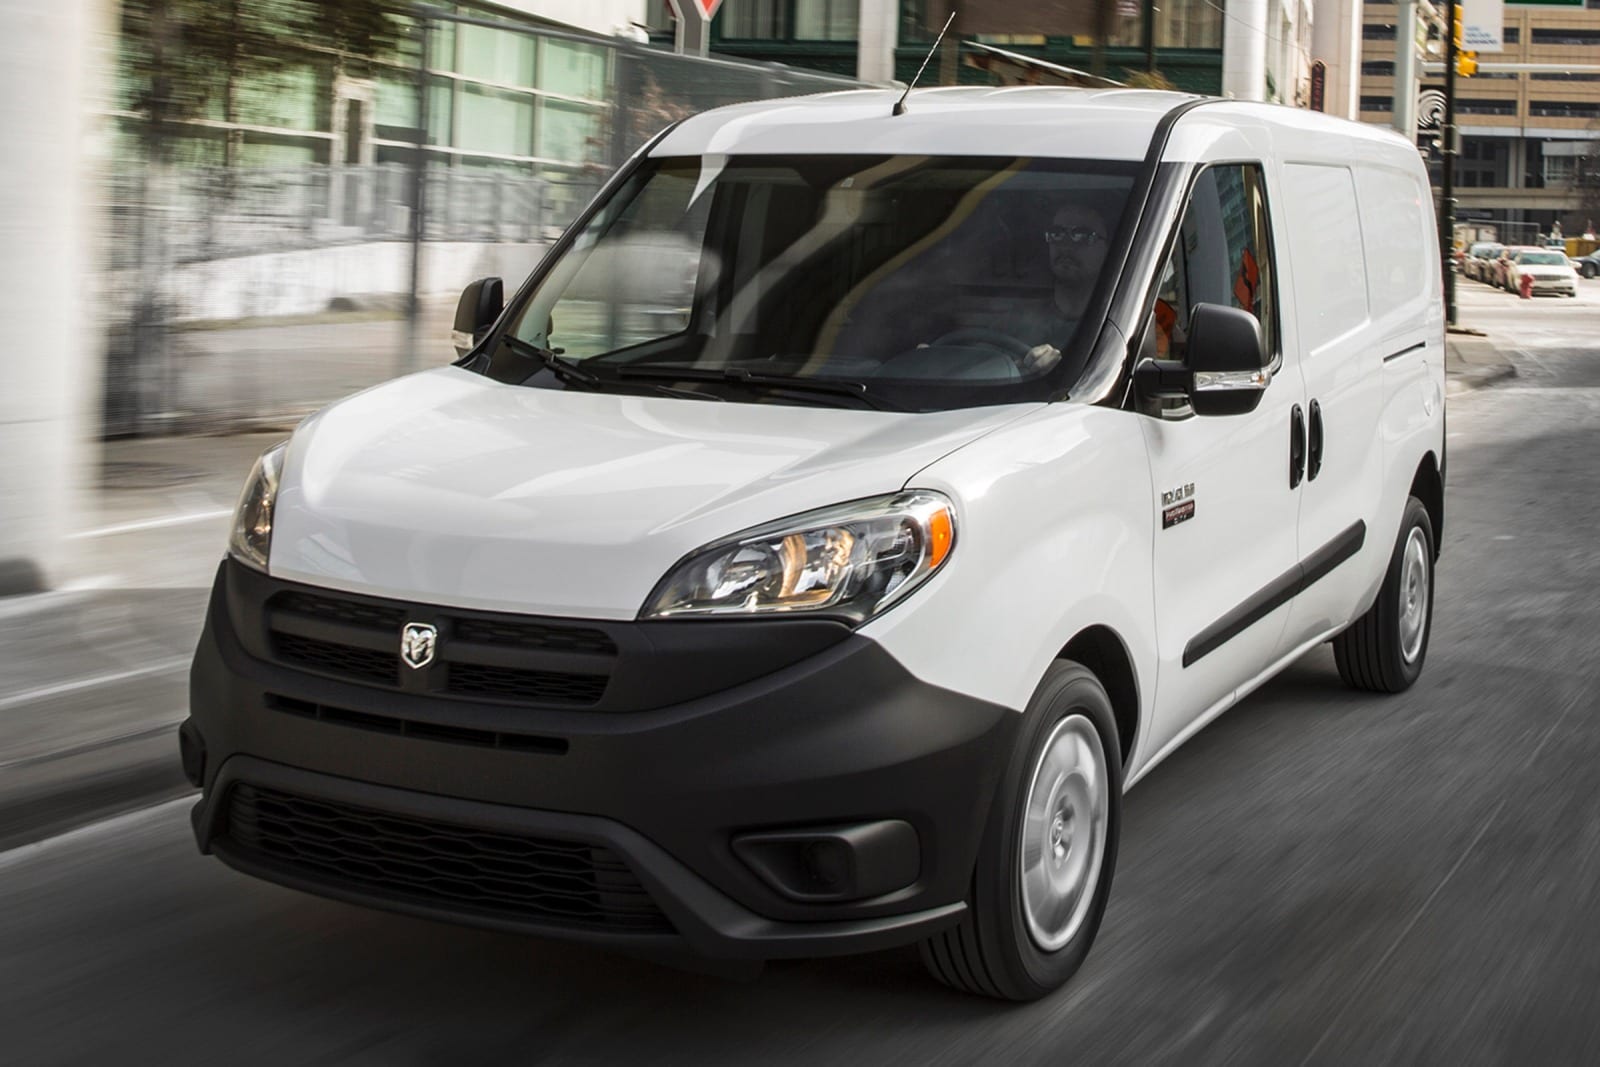 2016 Ram Promaster City Review 